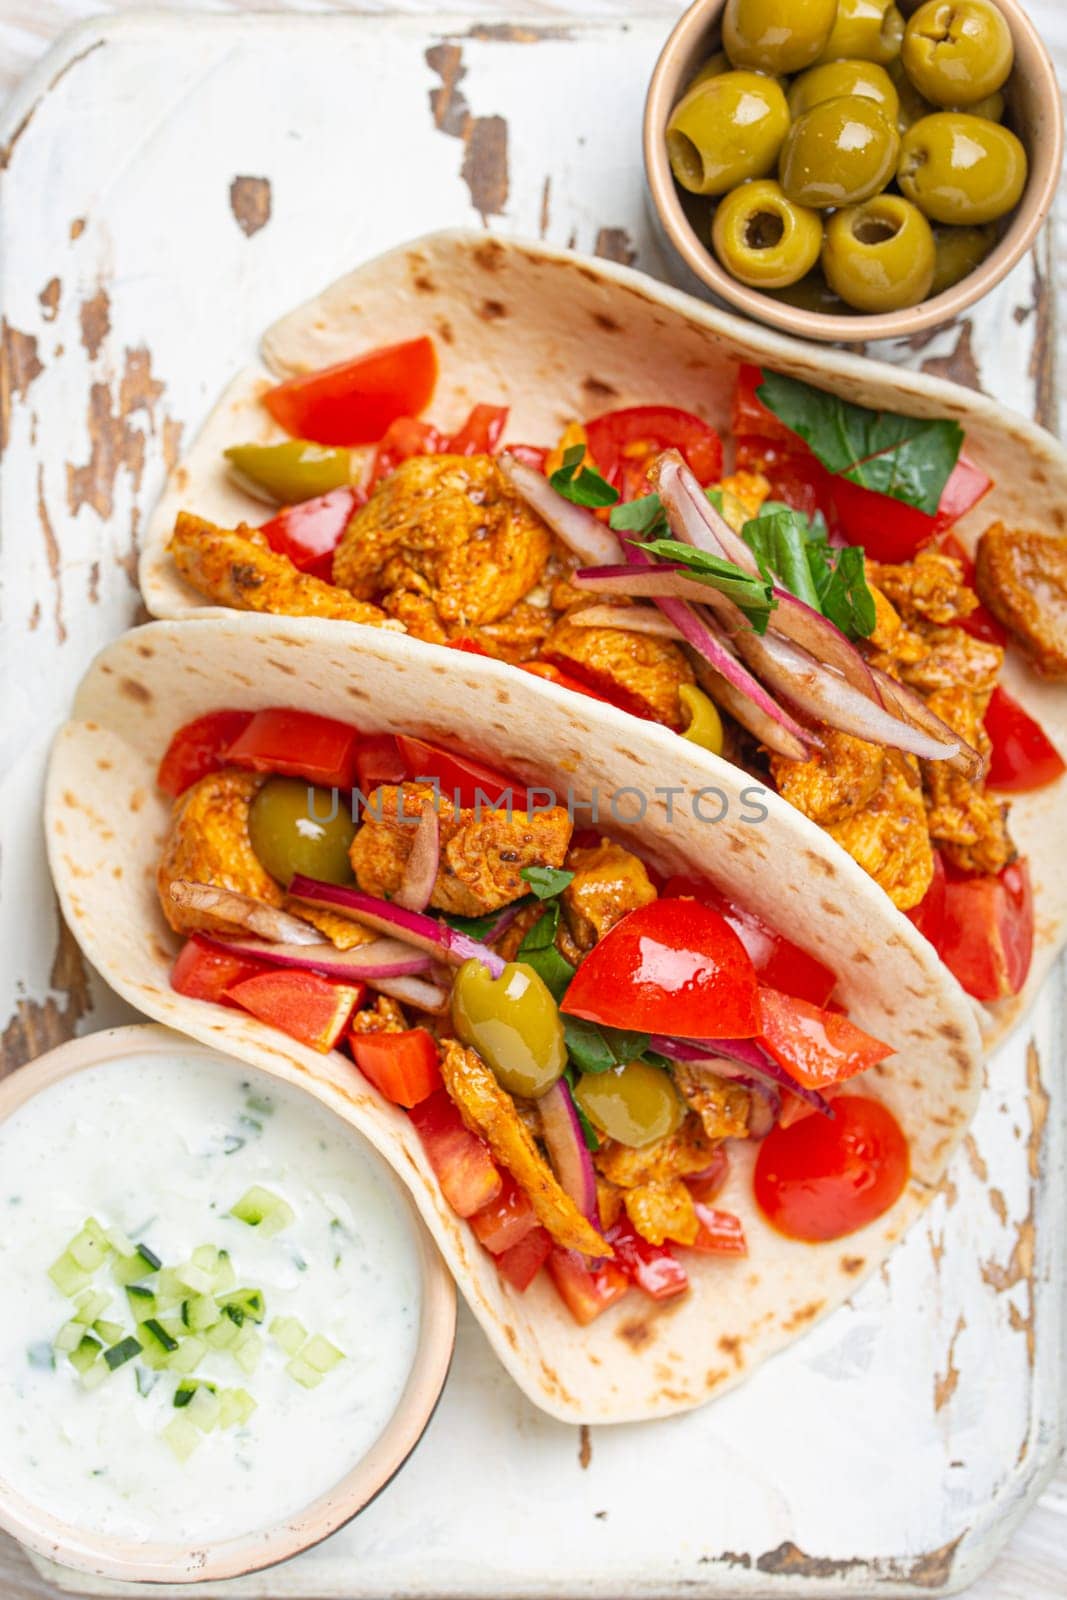 Traditional Greek Dish Gyros: Pita bread Wraps with vegetables, meat, herbs, olives on rustic wooden cutting board with Tzatziki sauce, olive oil top view on white wooden background, closeup. by its_al_dente